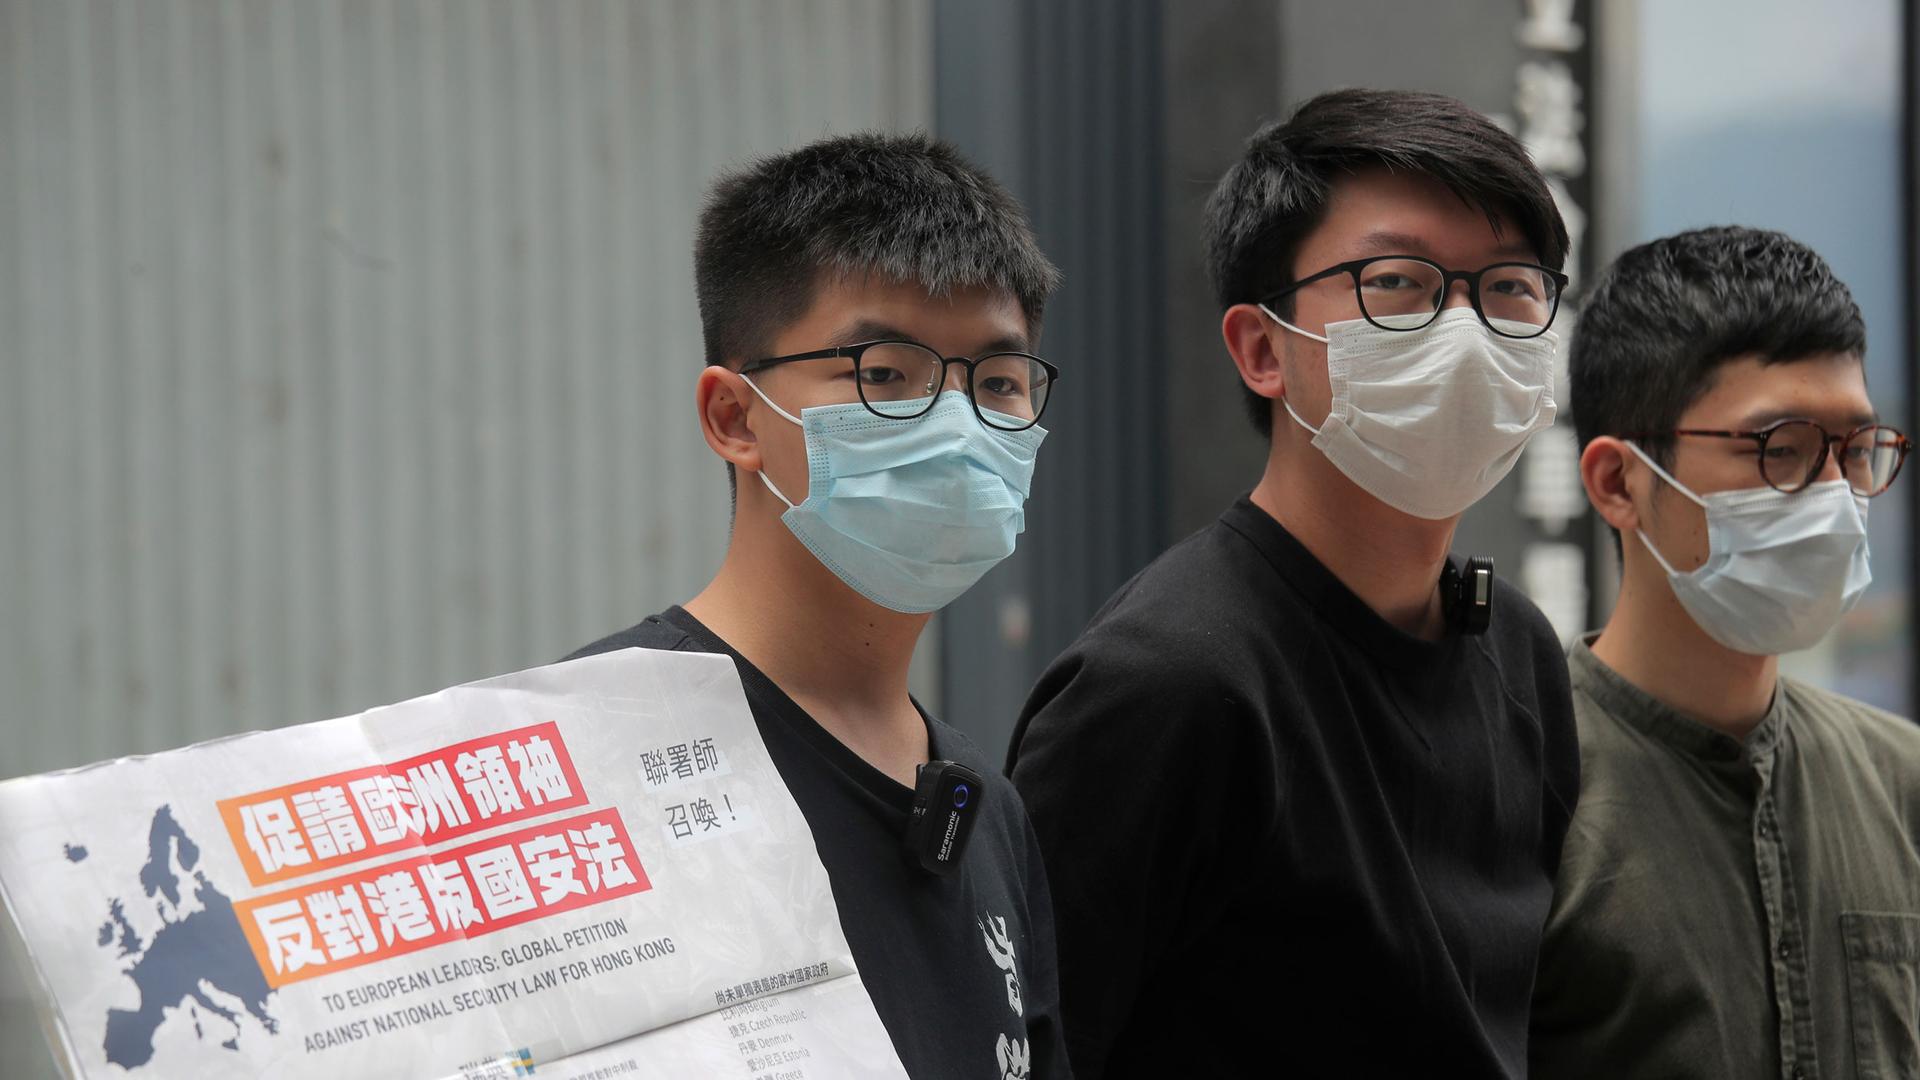 Pro-democracy activists, Joshua Wong, left, Sunny Cheung, center, and Nathan Law holding a placard, speak to media to urge the European leaders against national security law for Hong Kong outside the Legislative Council.